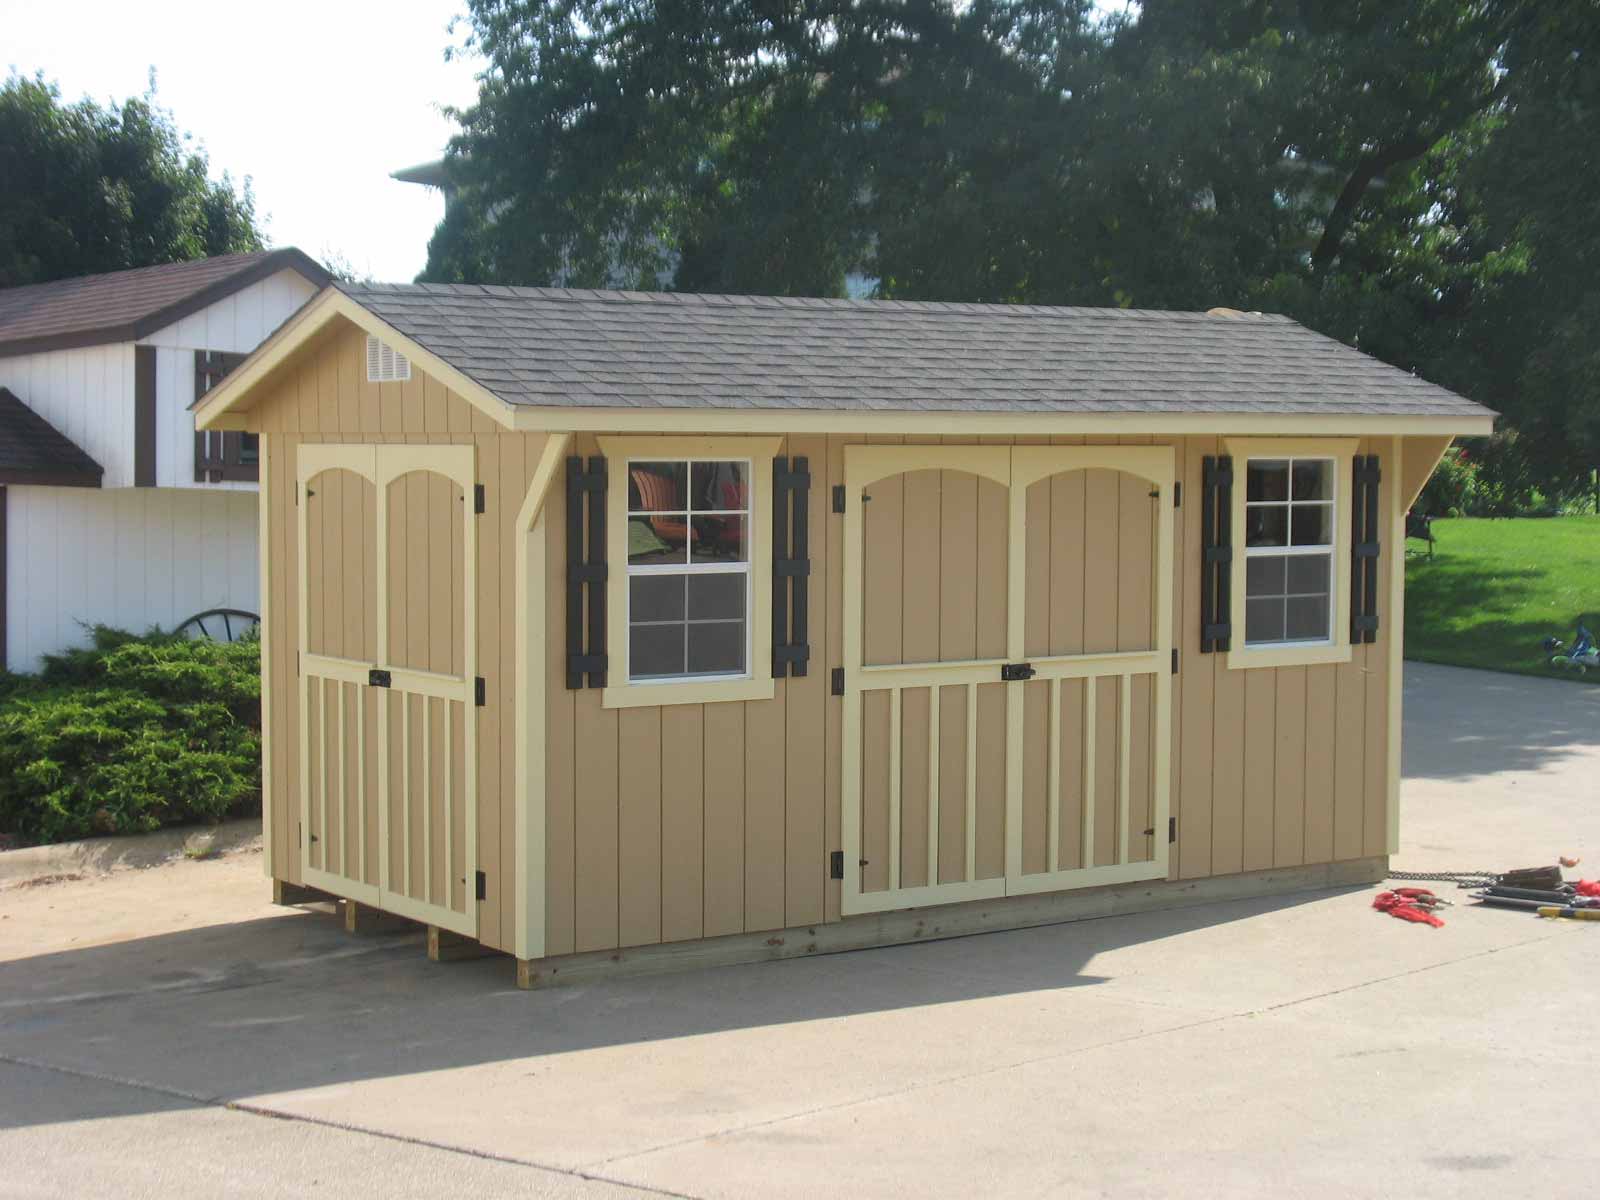  Storage Sheds / Carriage House Storage Shed Pricing &amp; Options List